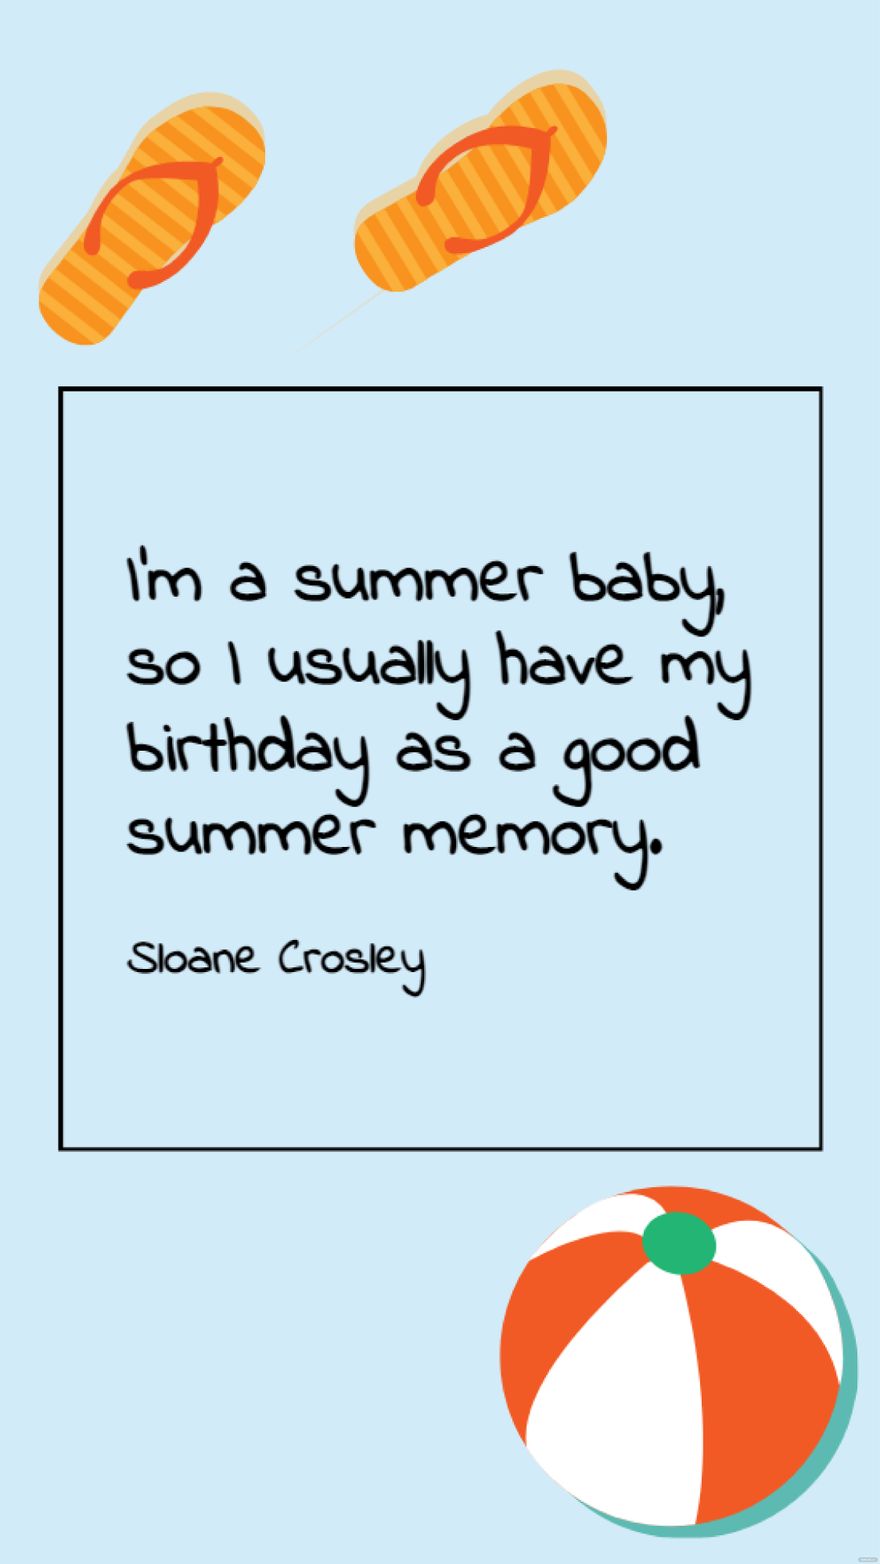 Sloane Crosley - I'm a summer baby, so I usually have my birthday as a good summer memory. in JPG